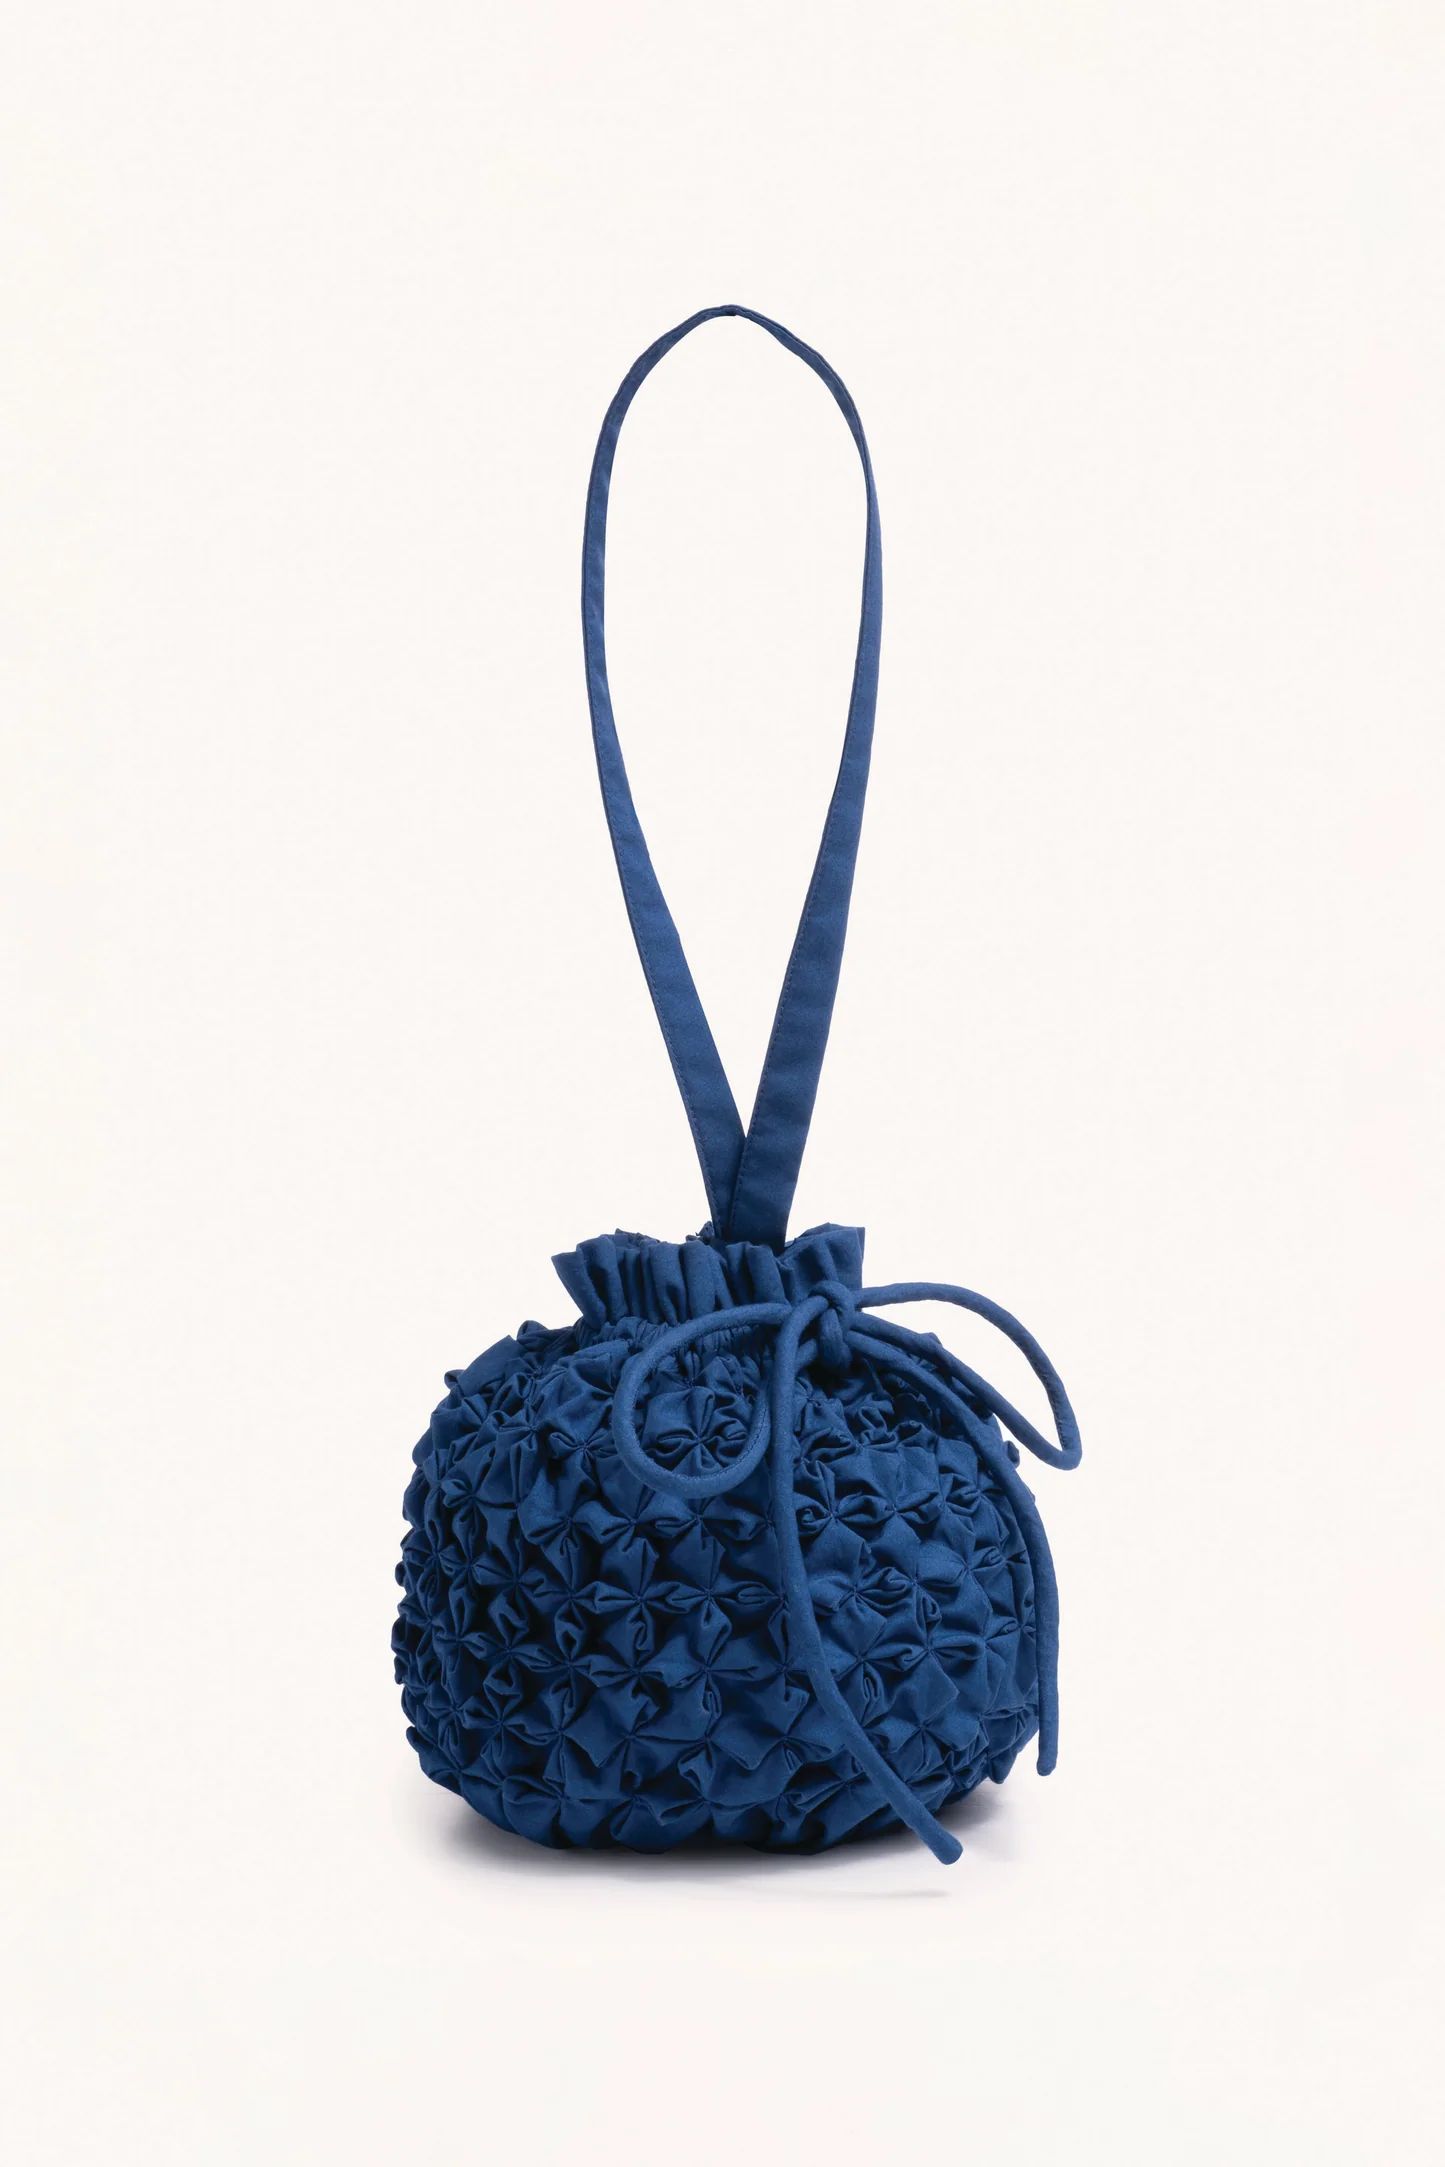 Deco Pouch in Sapphire | Merlette NYC